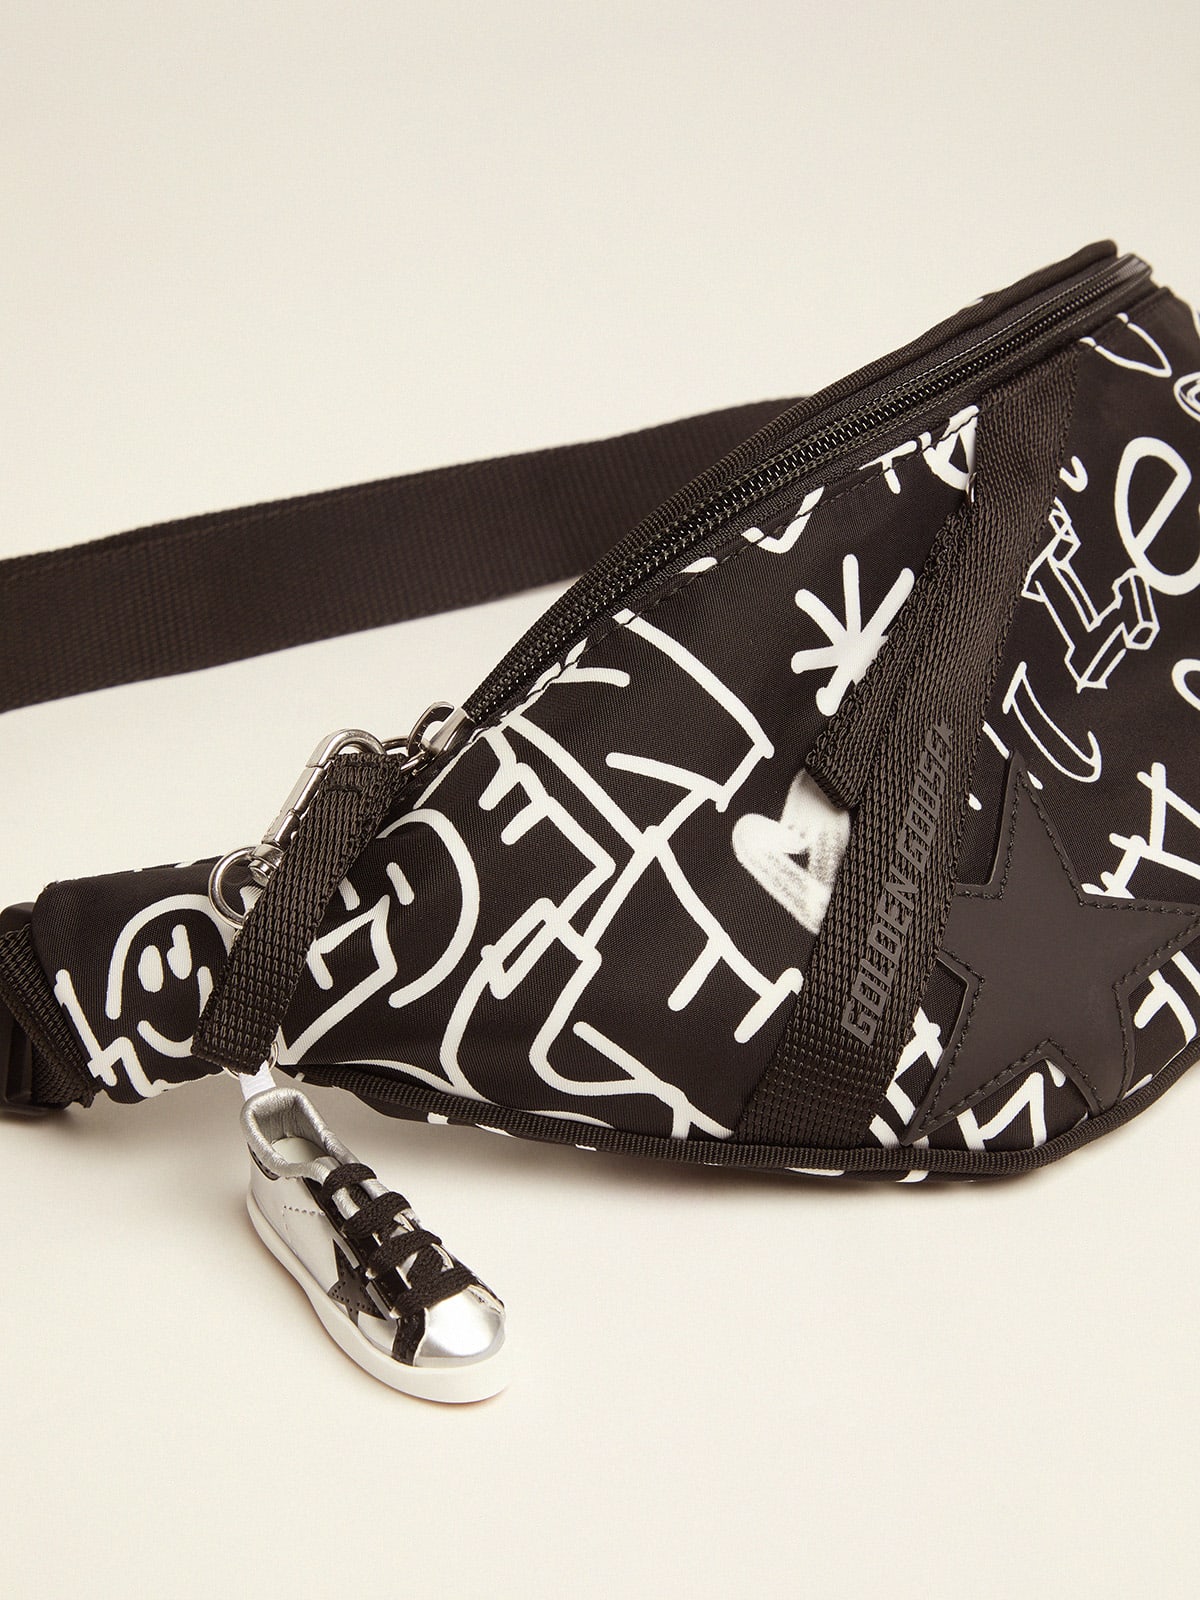 Golden Goose - Journey belt bag in black nylon with contrasting white decorations in 